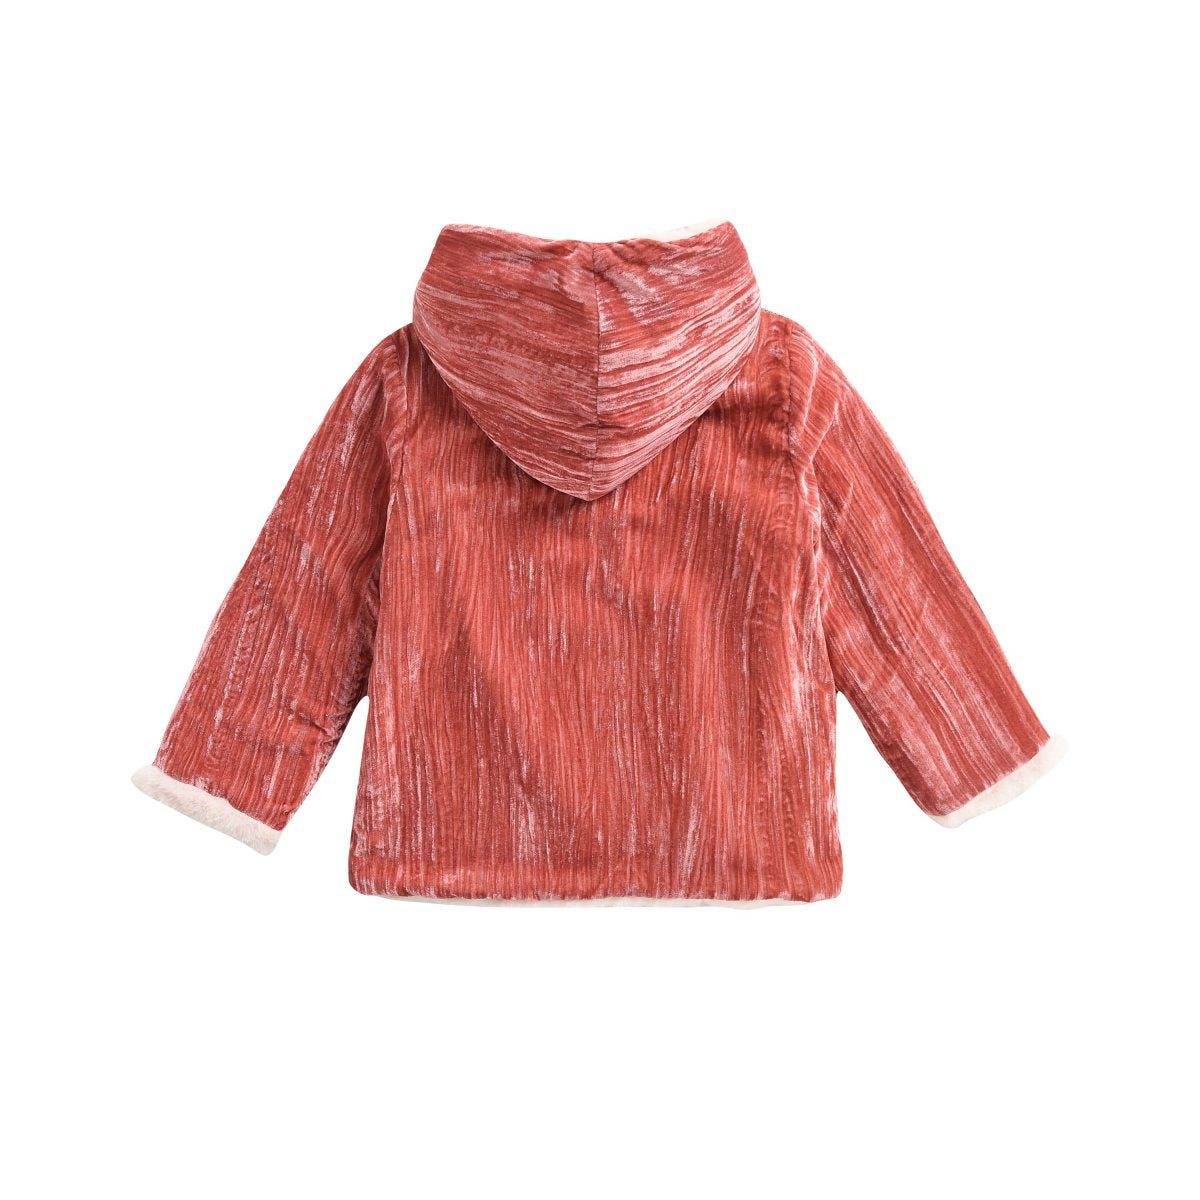 Girls Brick Red Embroidered Coat